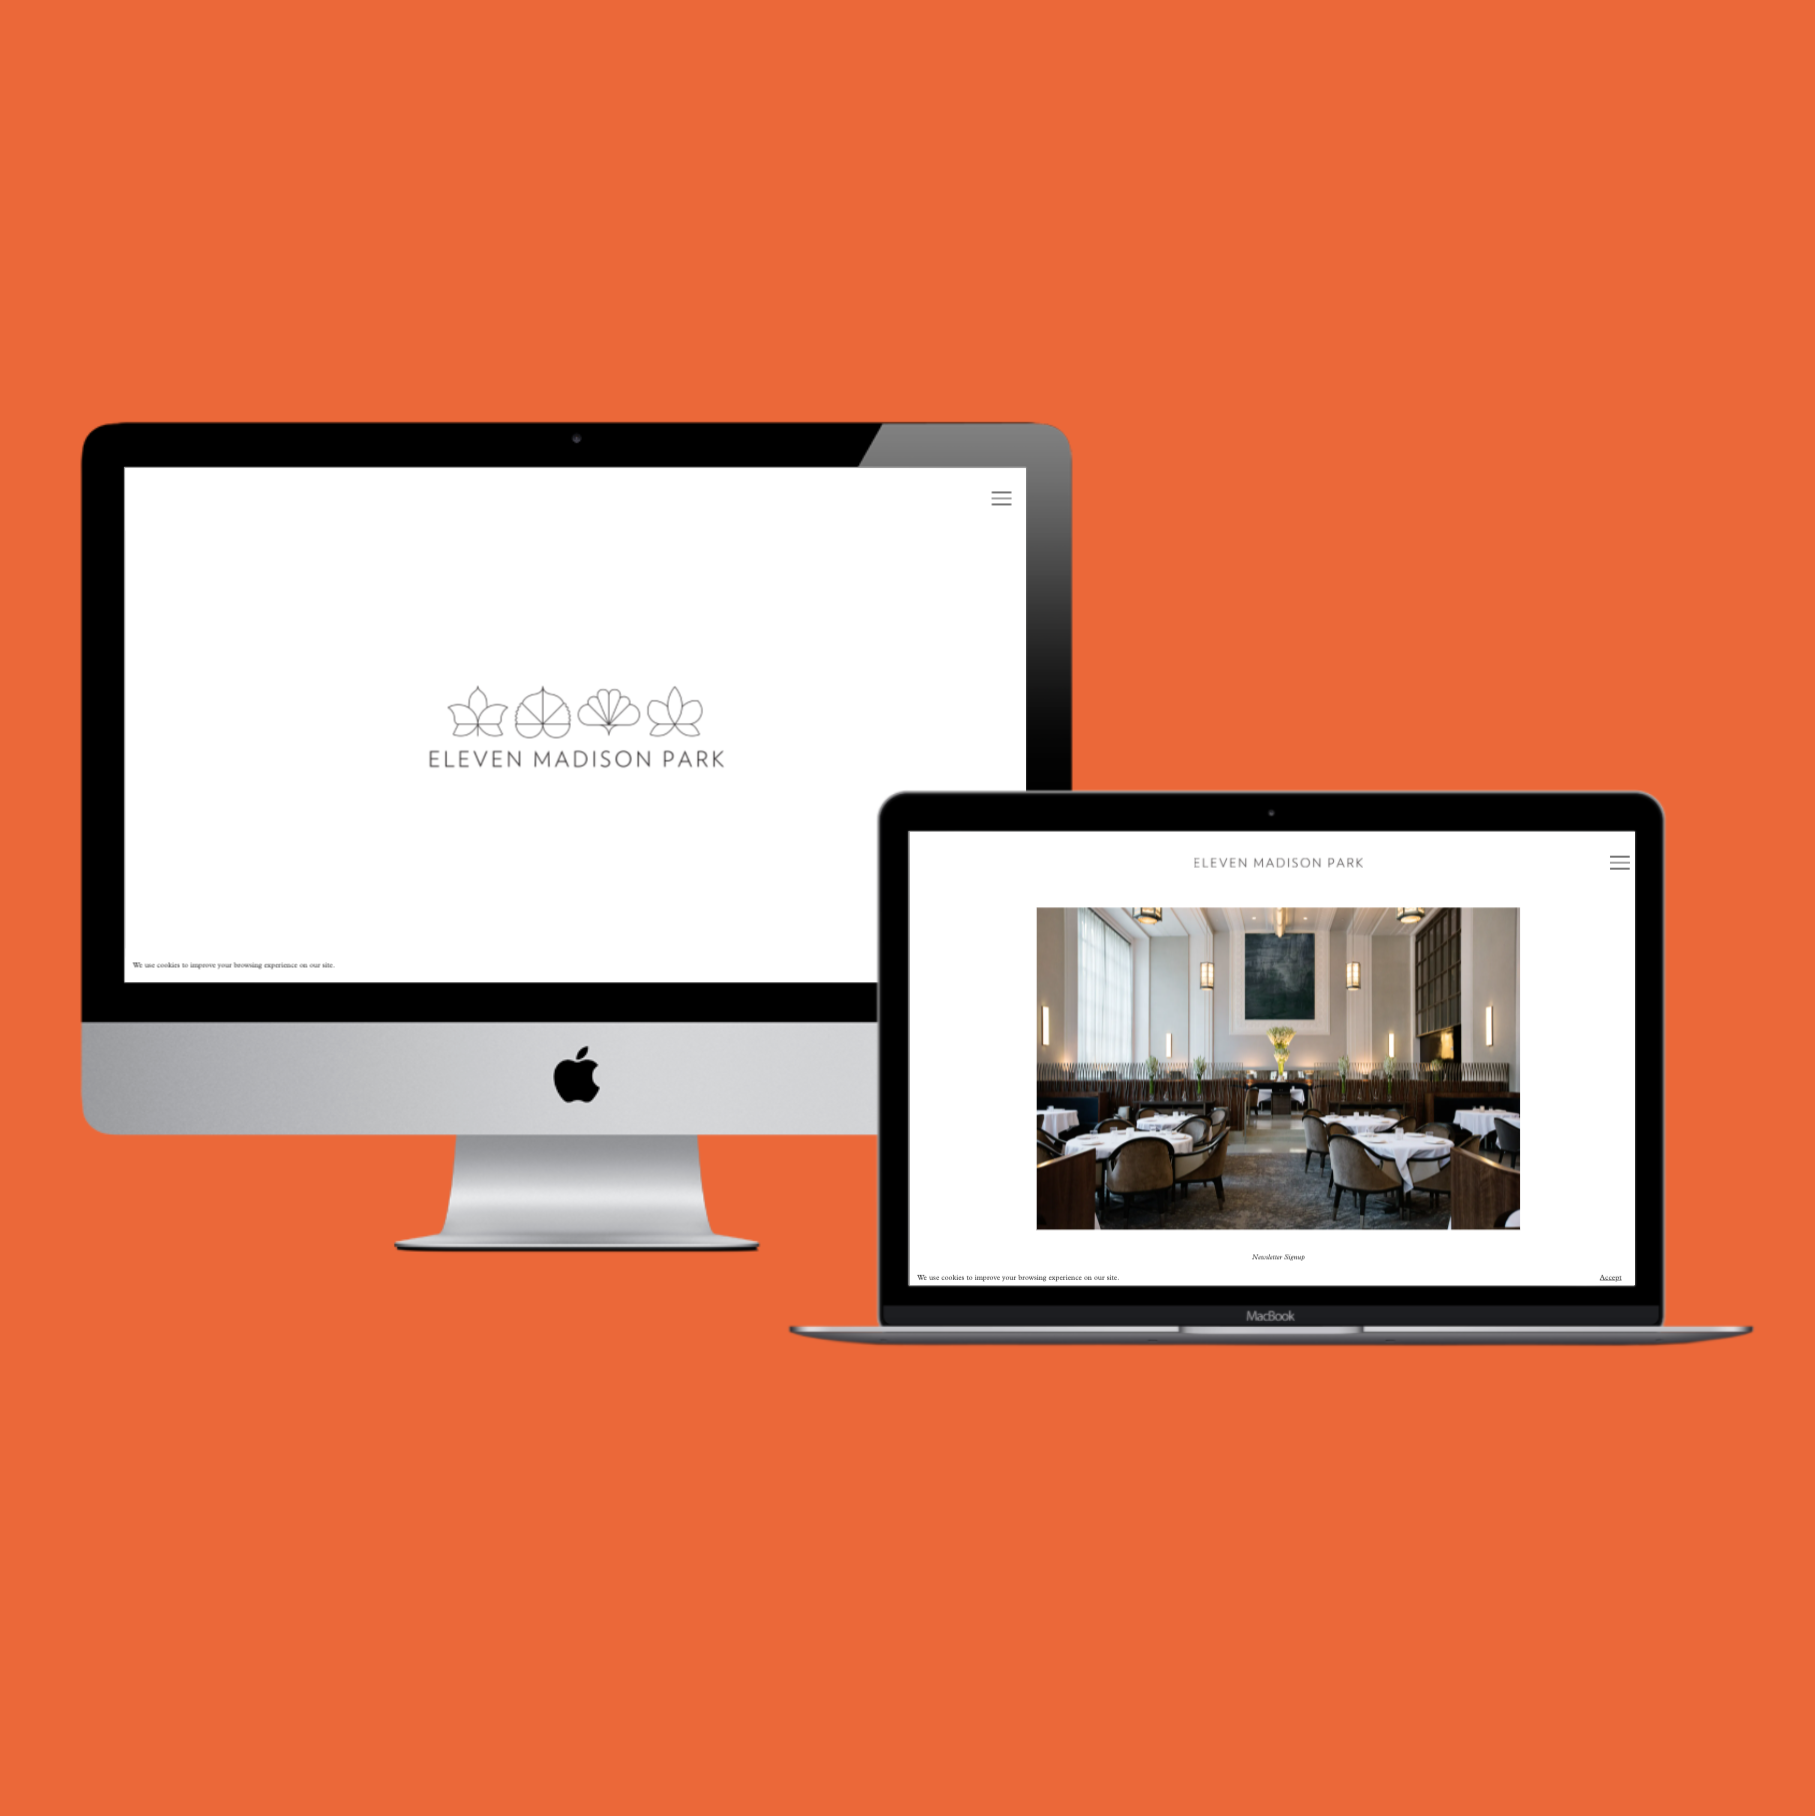 mockup computer screen of a rival restaurant with an orange background